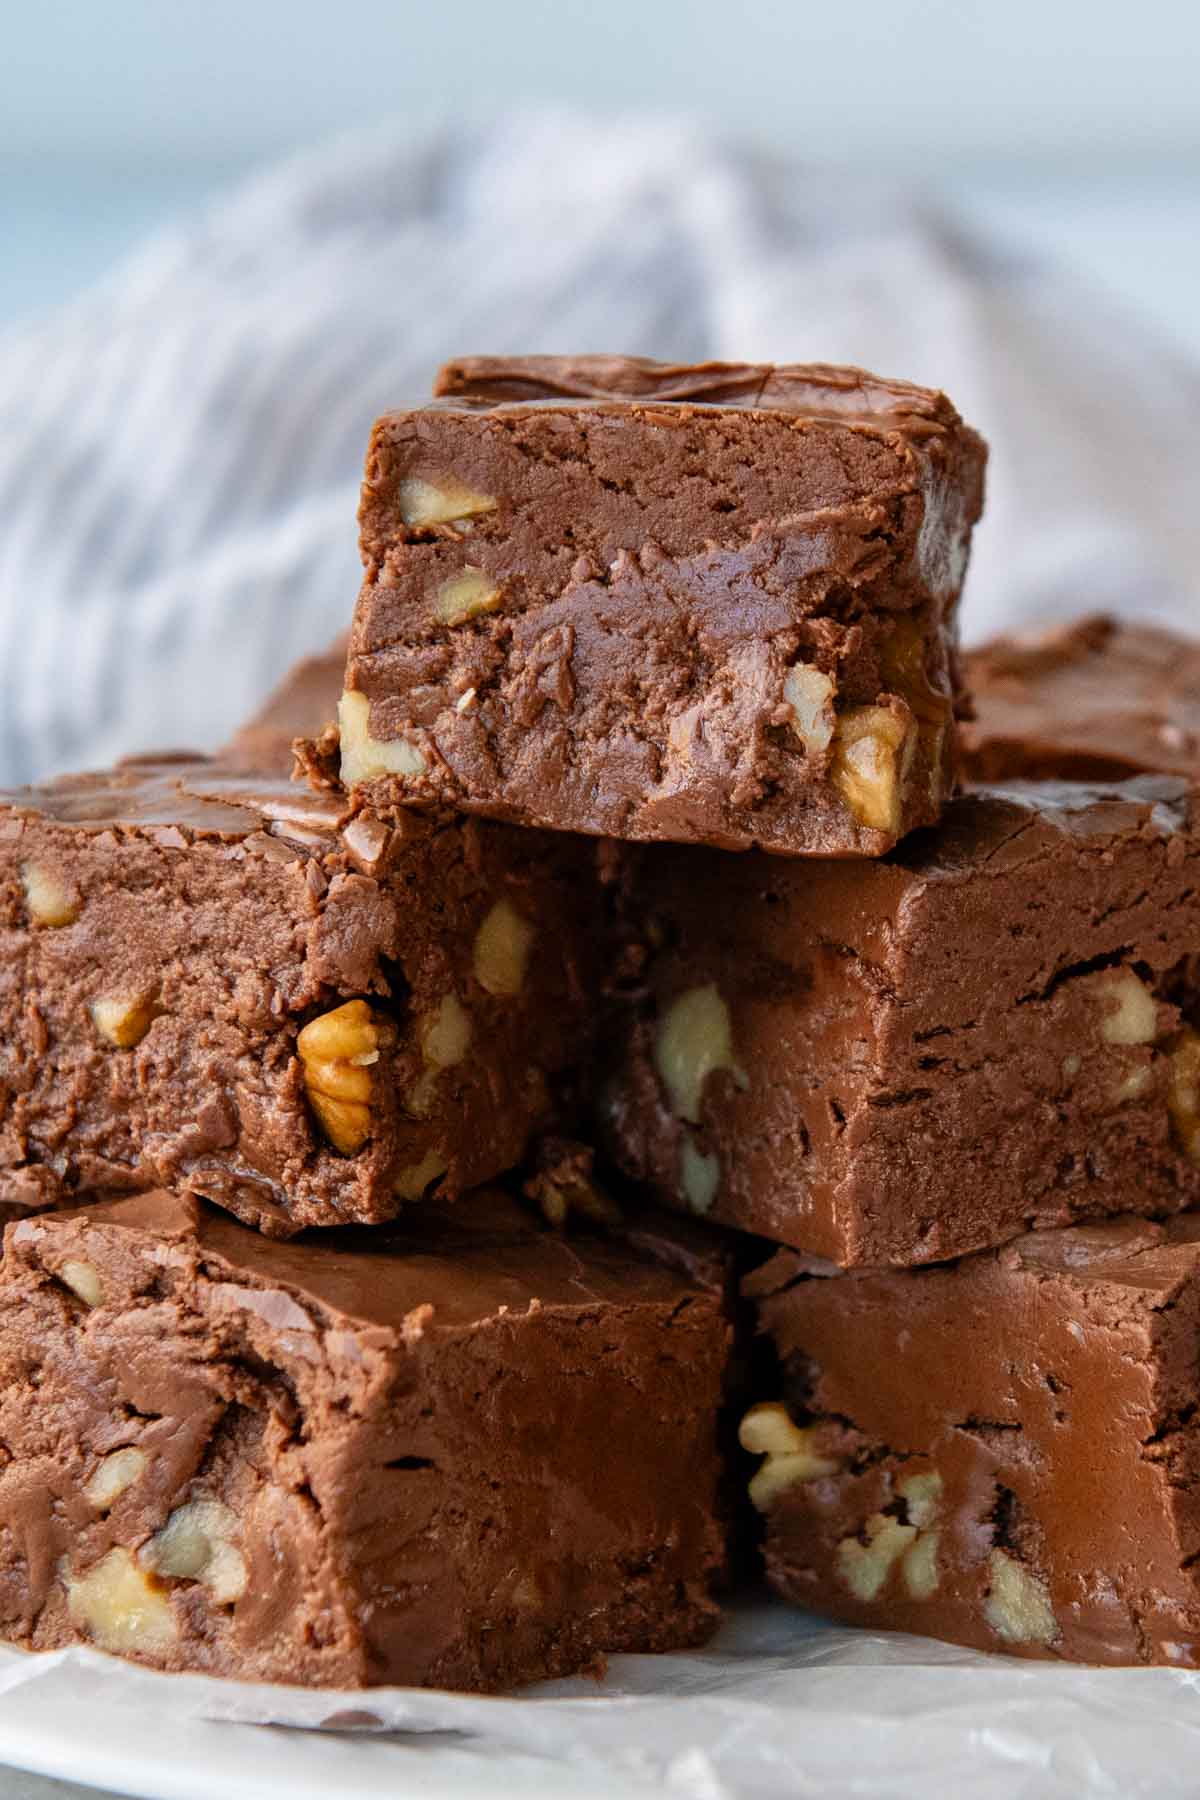 a stack of chocolate fudge with nuts inside.